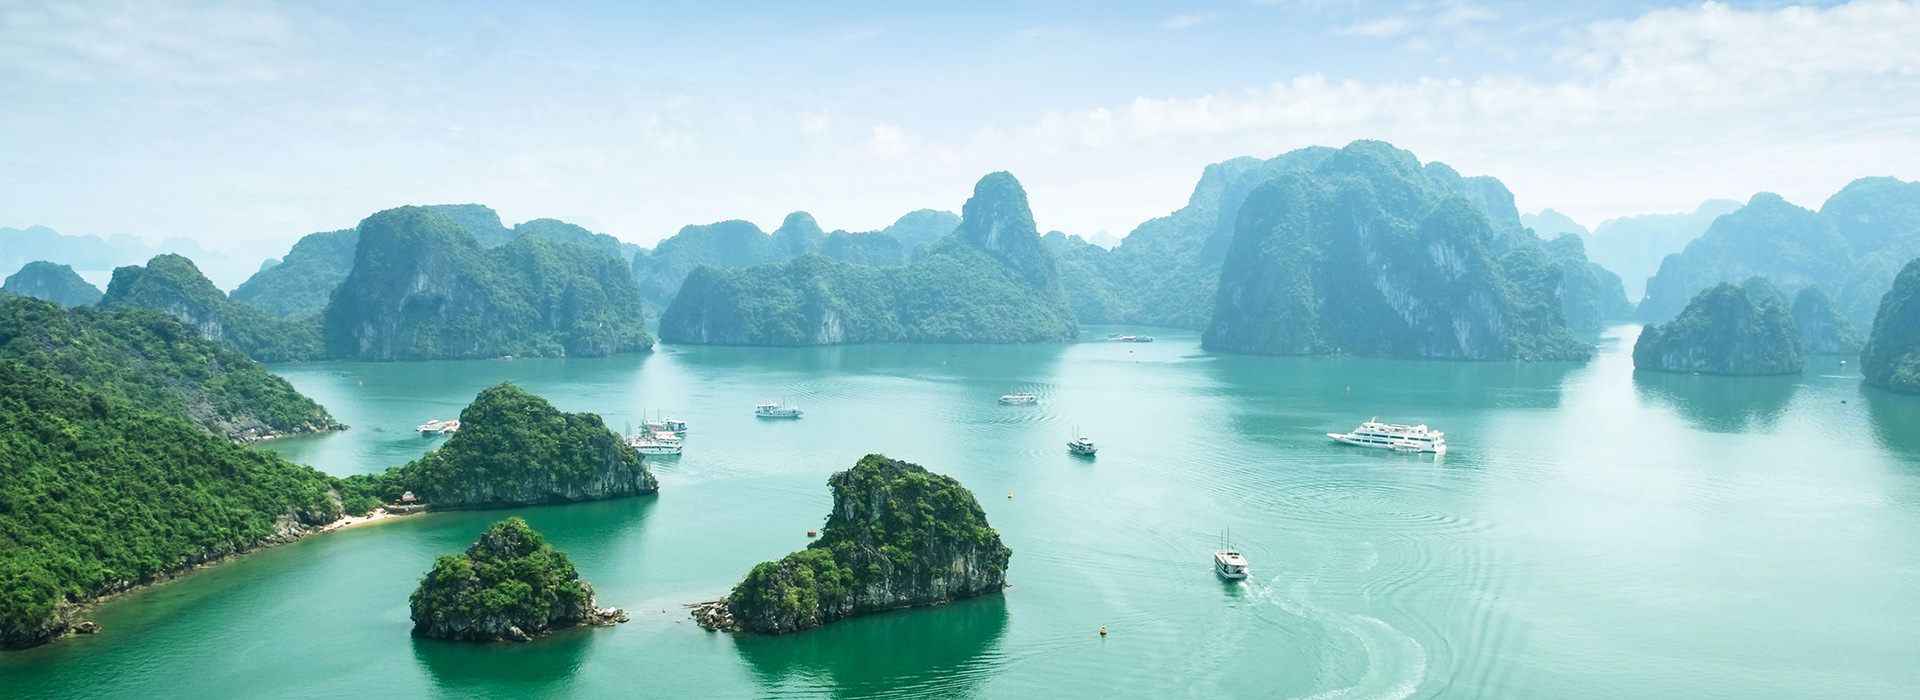 Vietnam Travel Guide - Travel Insights and Tips